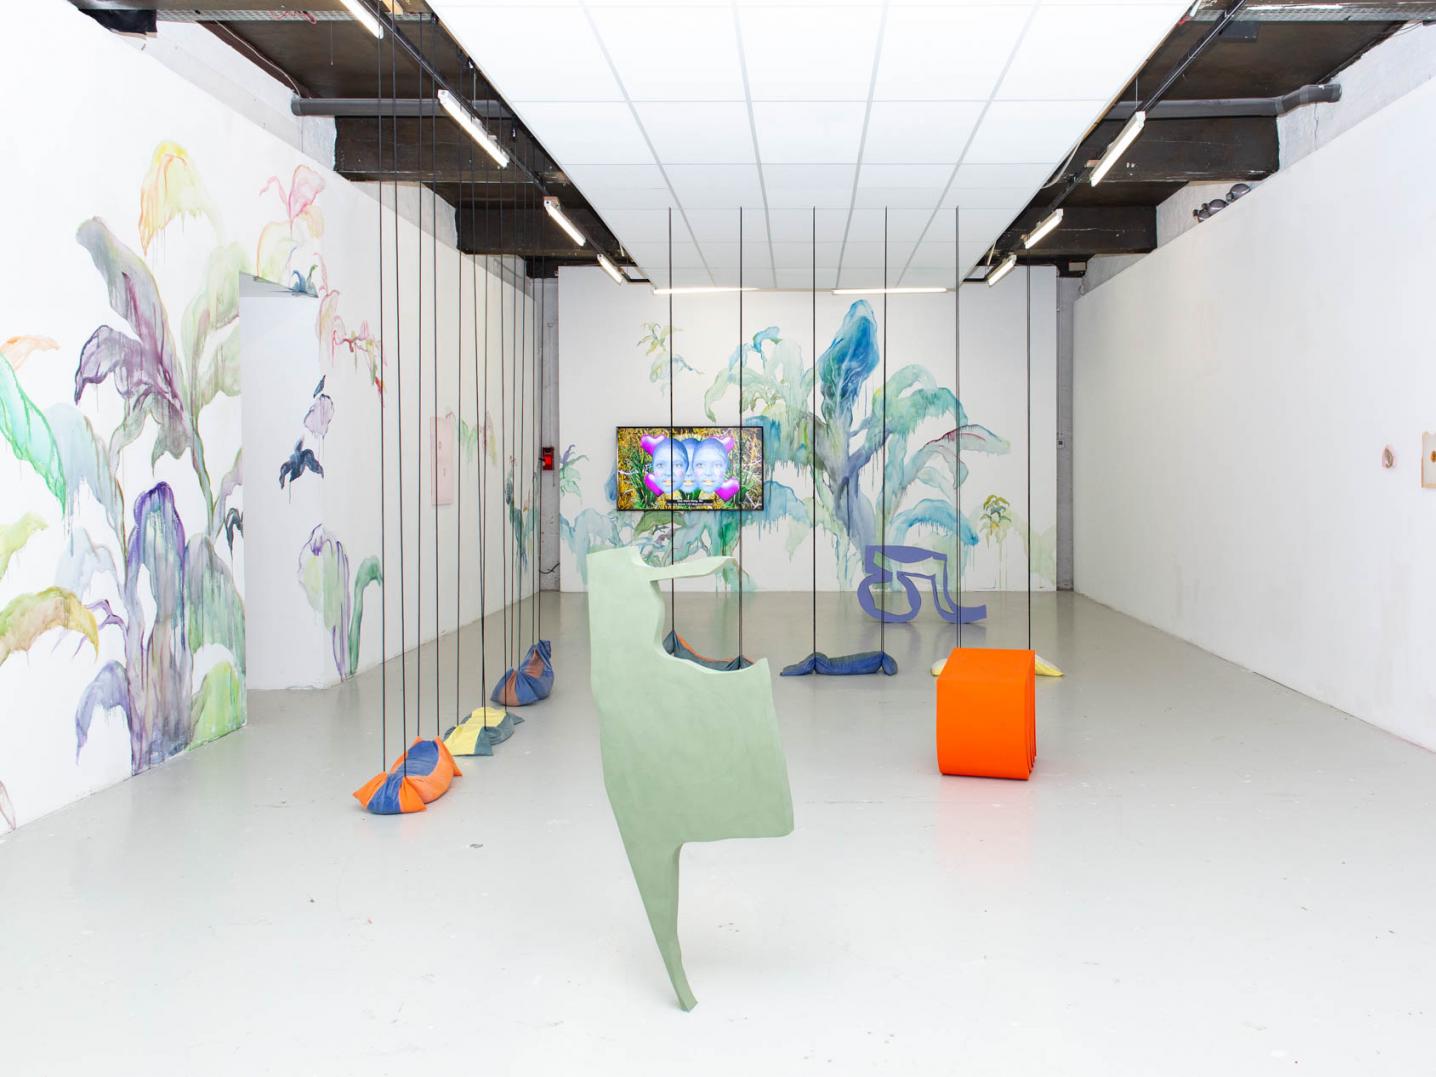 An exhibition room with several colourful objcets, a video screen and flowery wallpaper at the GENERATOR exhibition at EESAB in Quimper, France